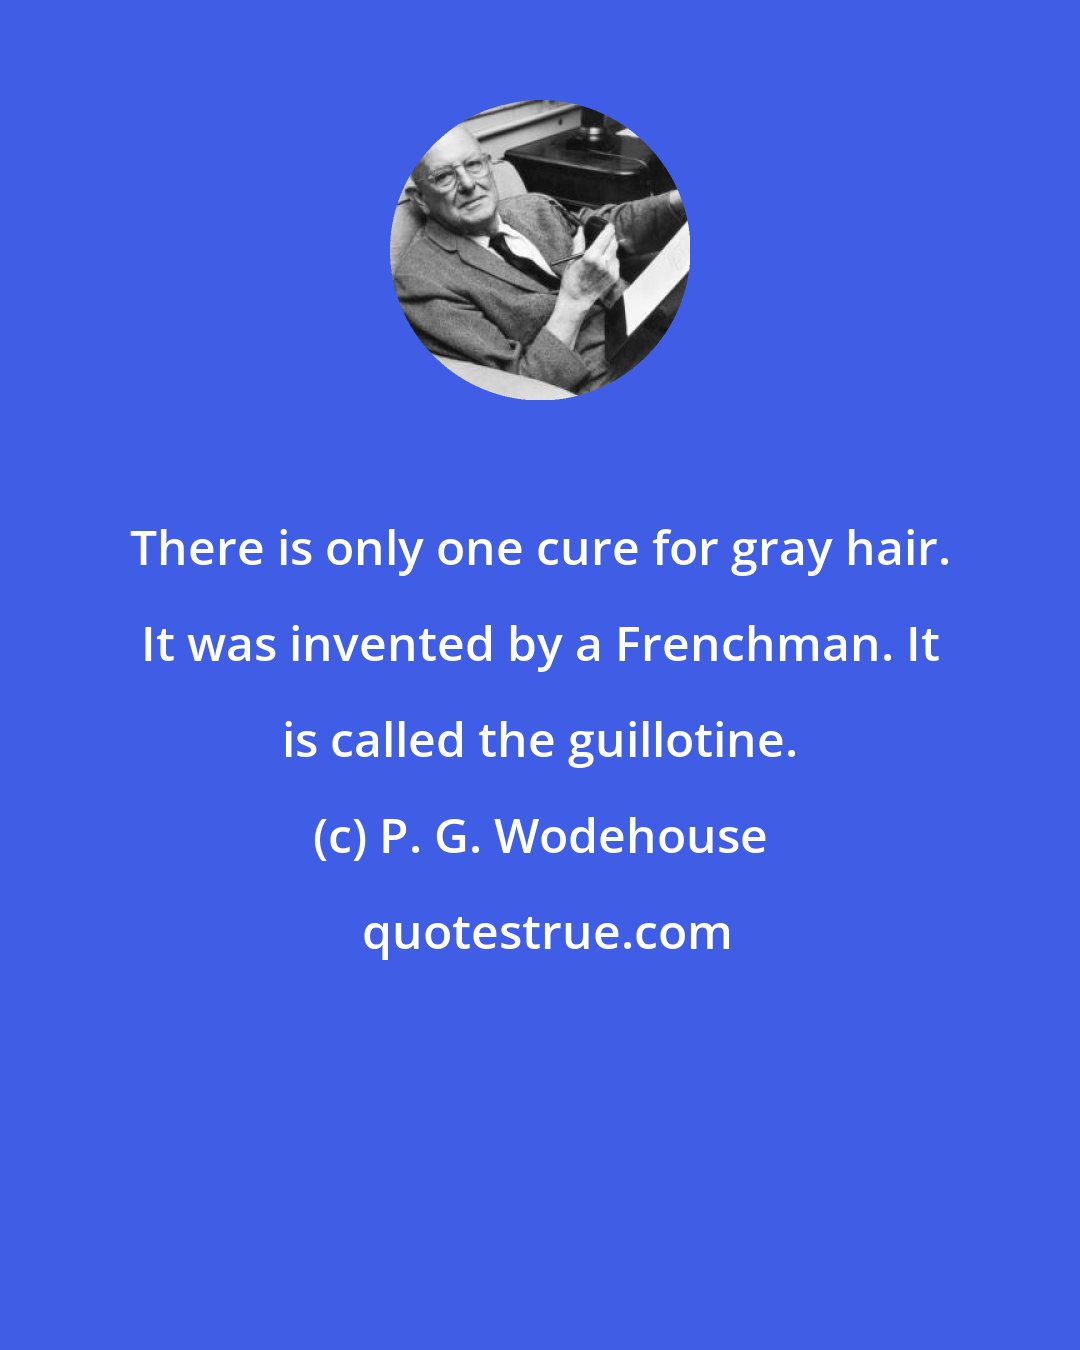 P. G. Wodehouse: There is only one cure for gray hair. It was invented by a Frenchman. It is called the guillotine.